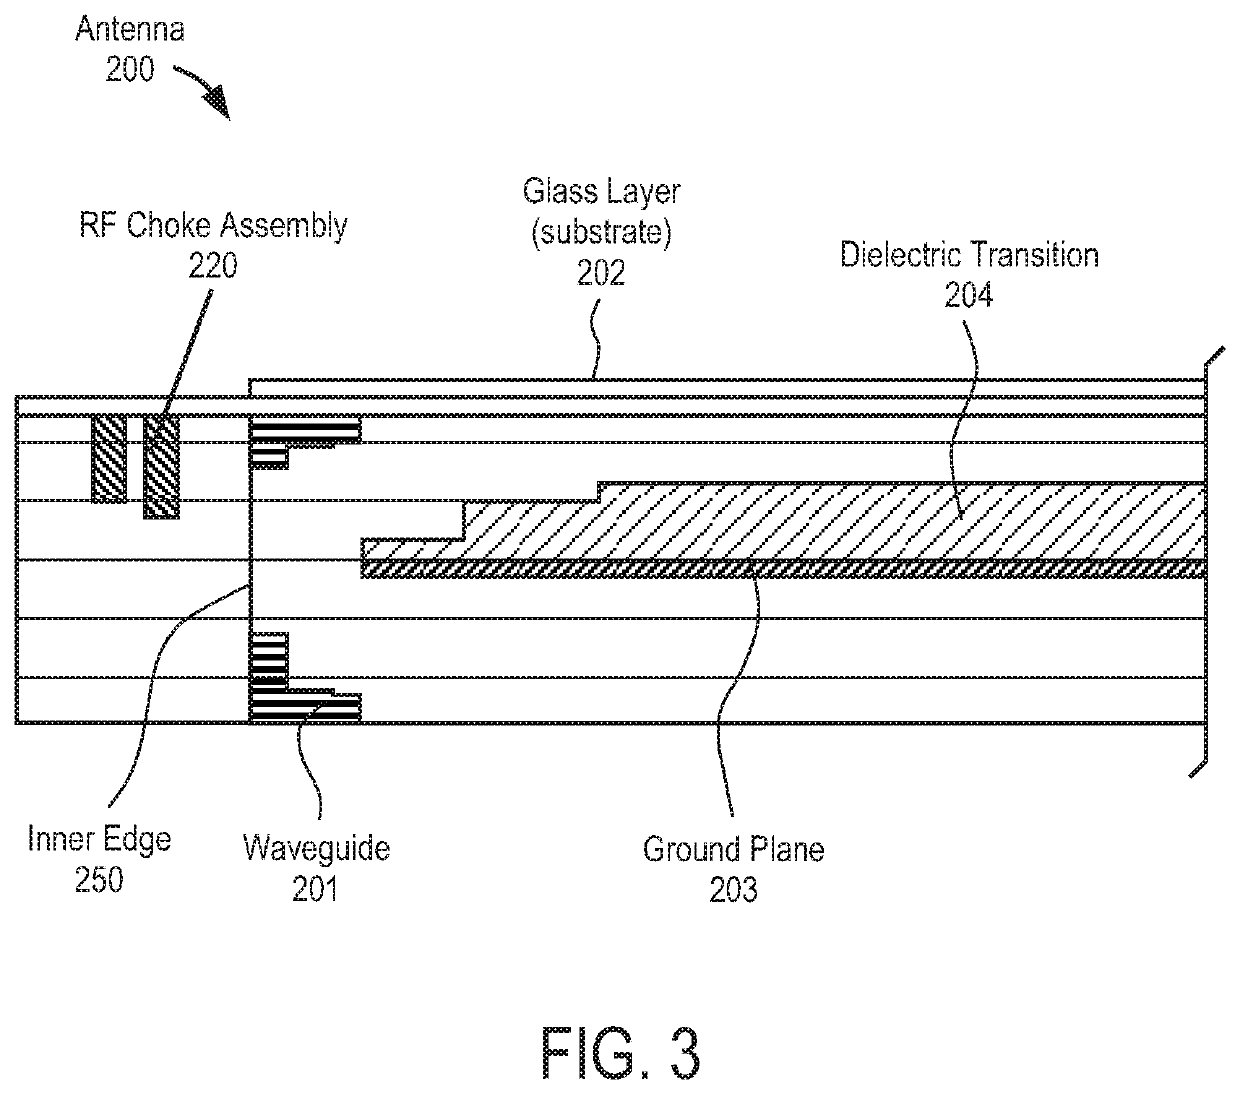 Broadband RF radial waveguide feed with integrated glass transition